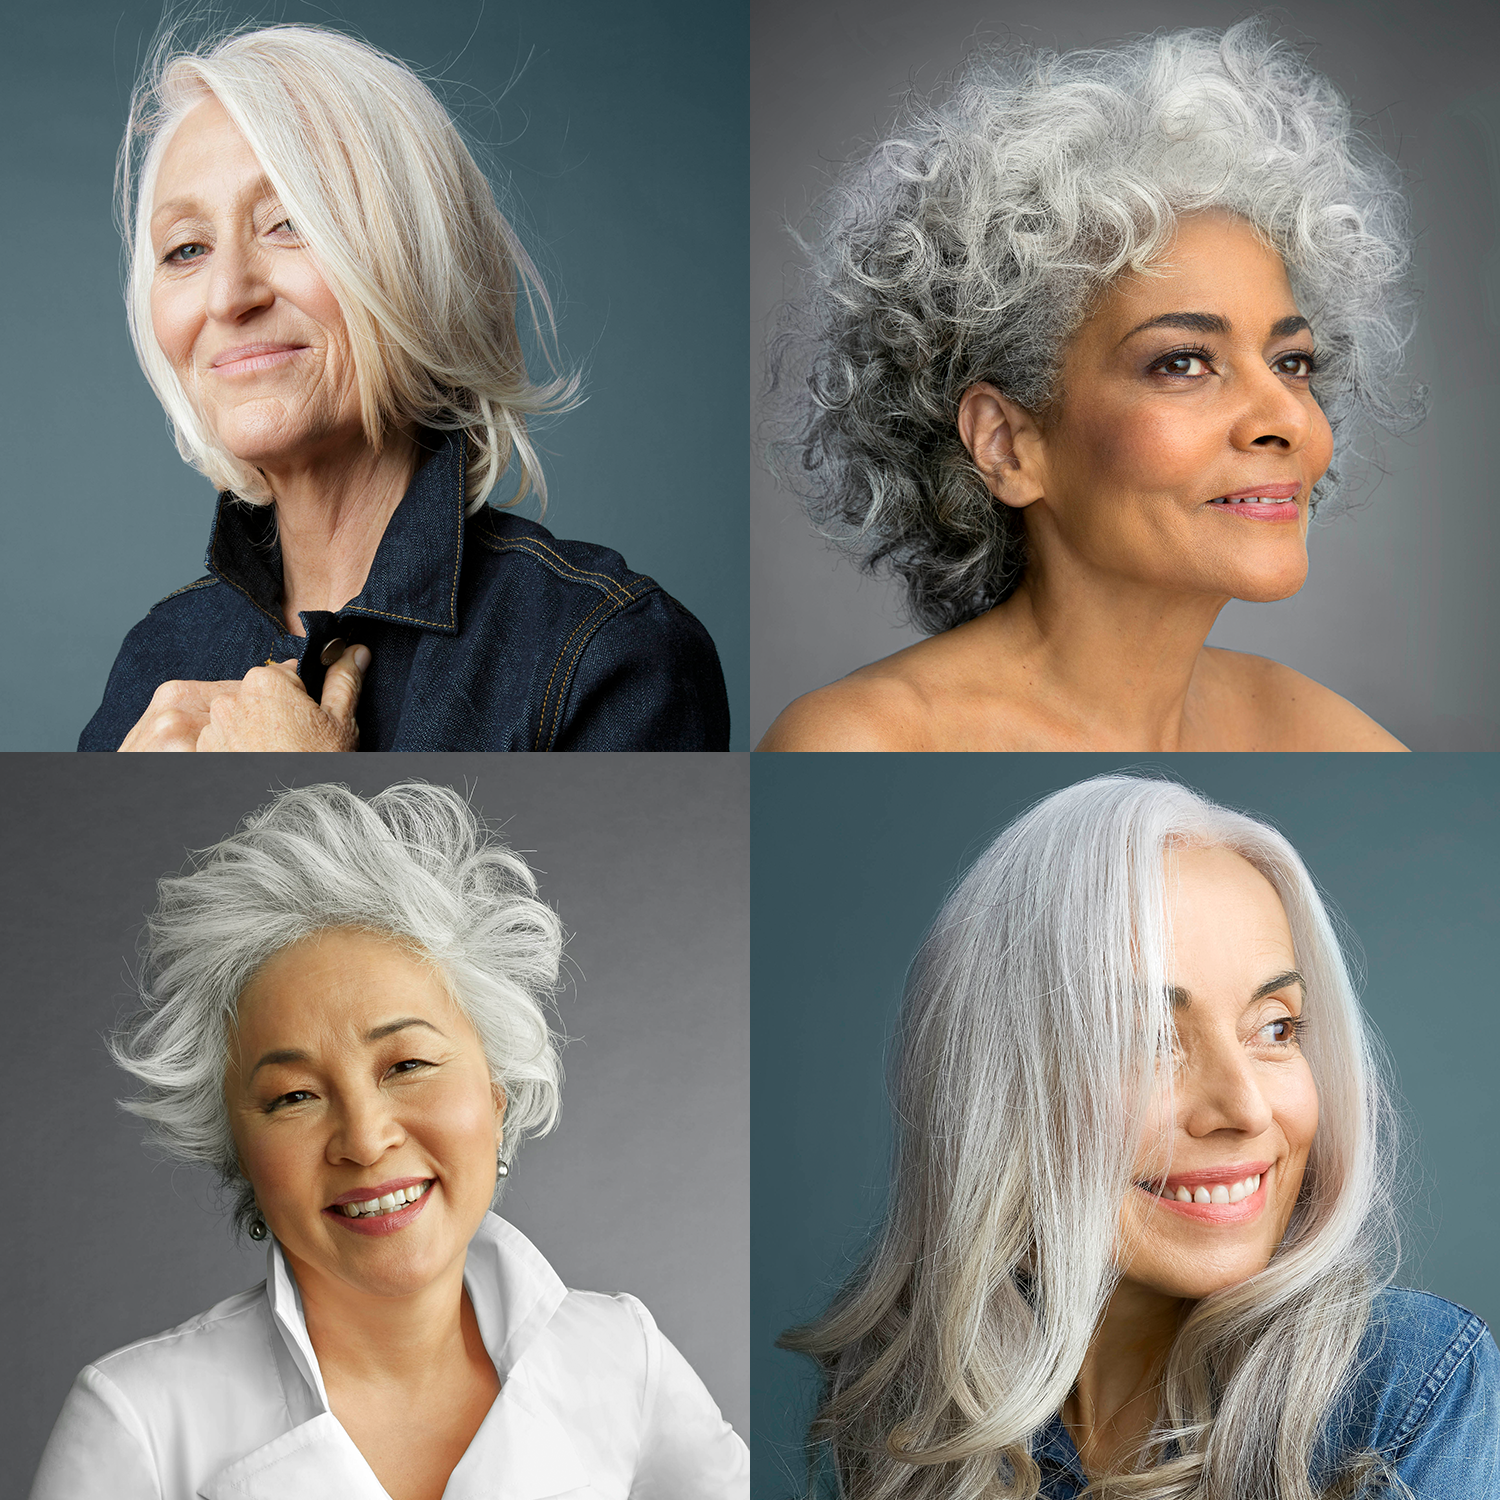 What Causes Gray Hair and Other Questions, Answered